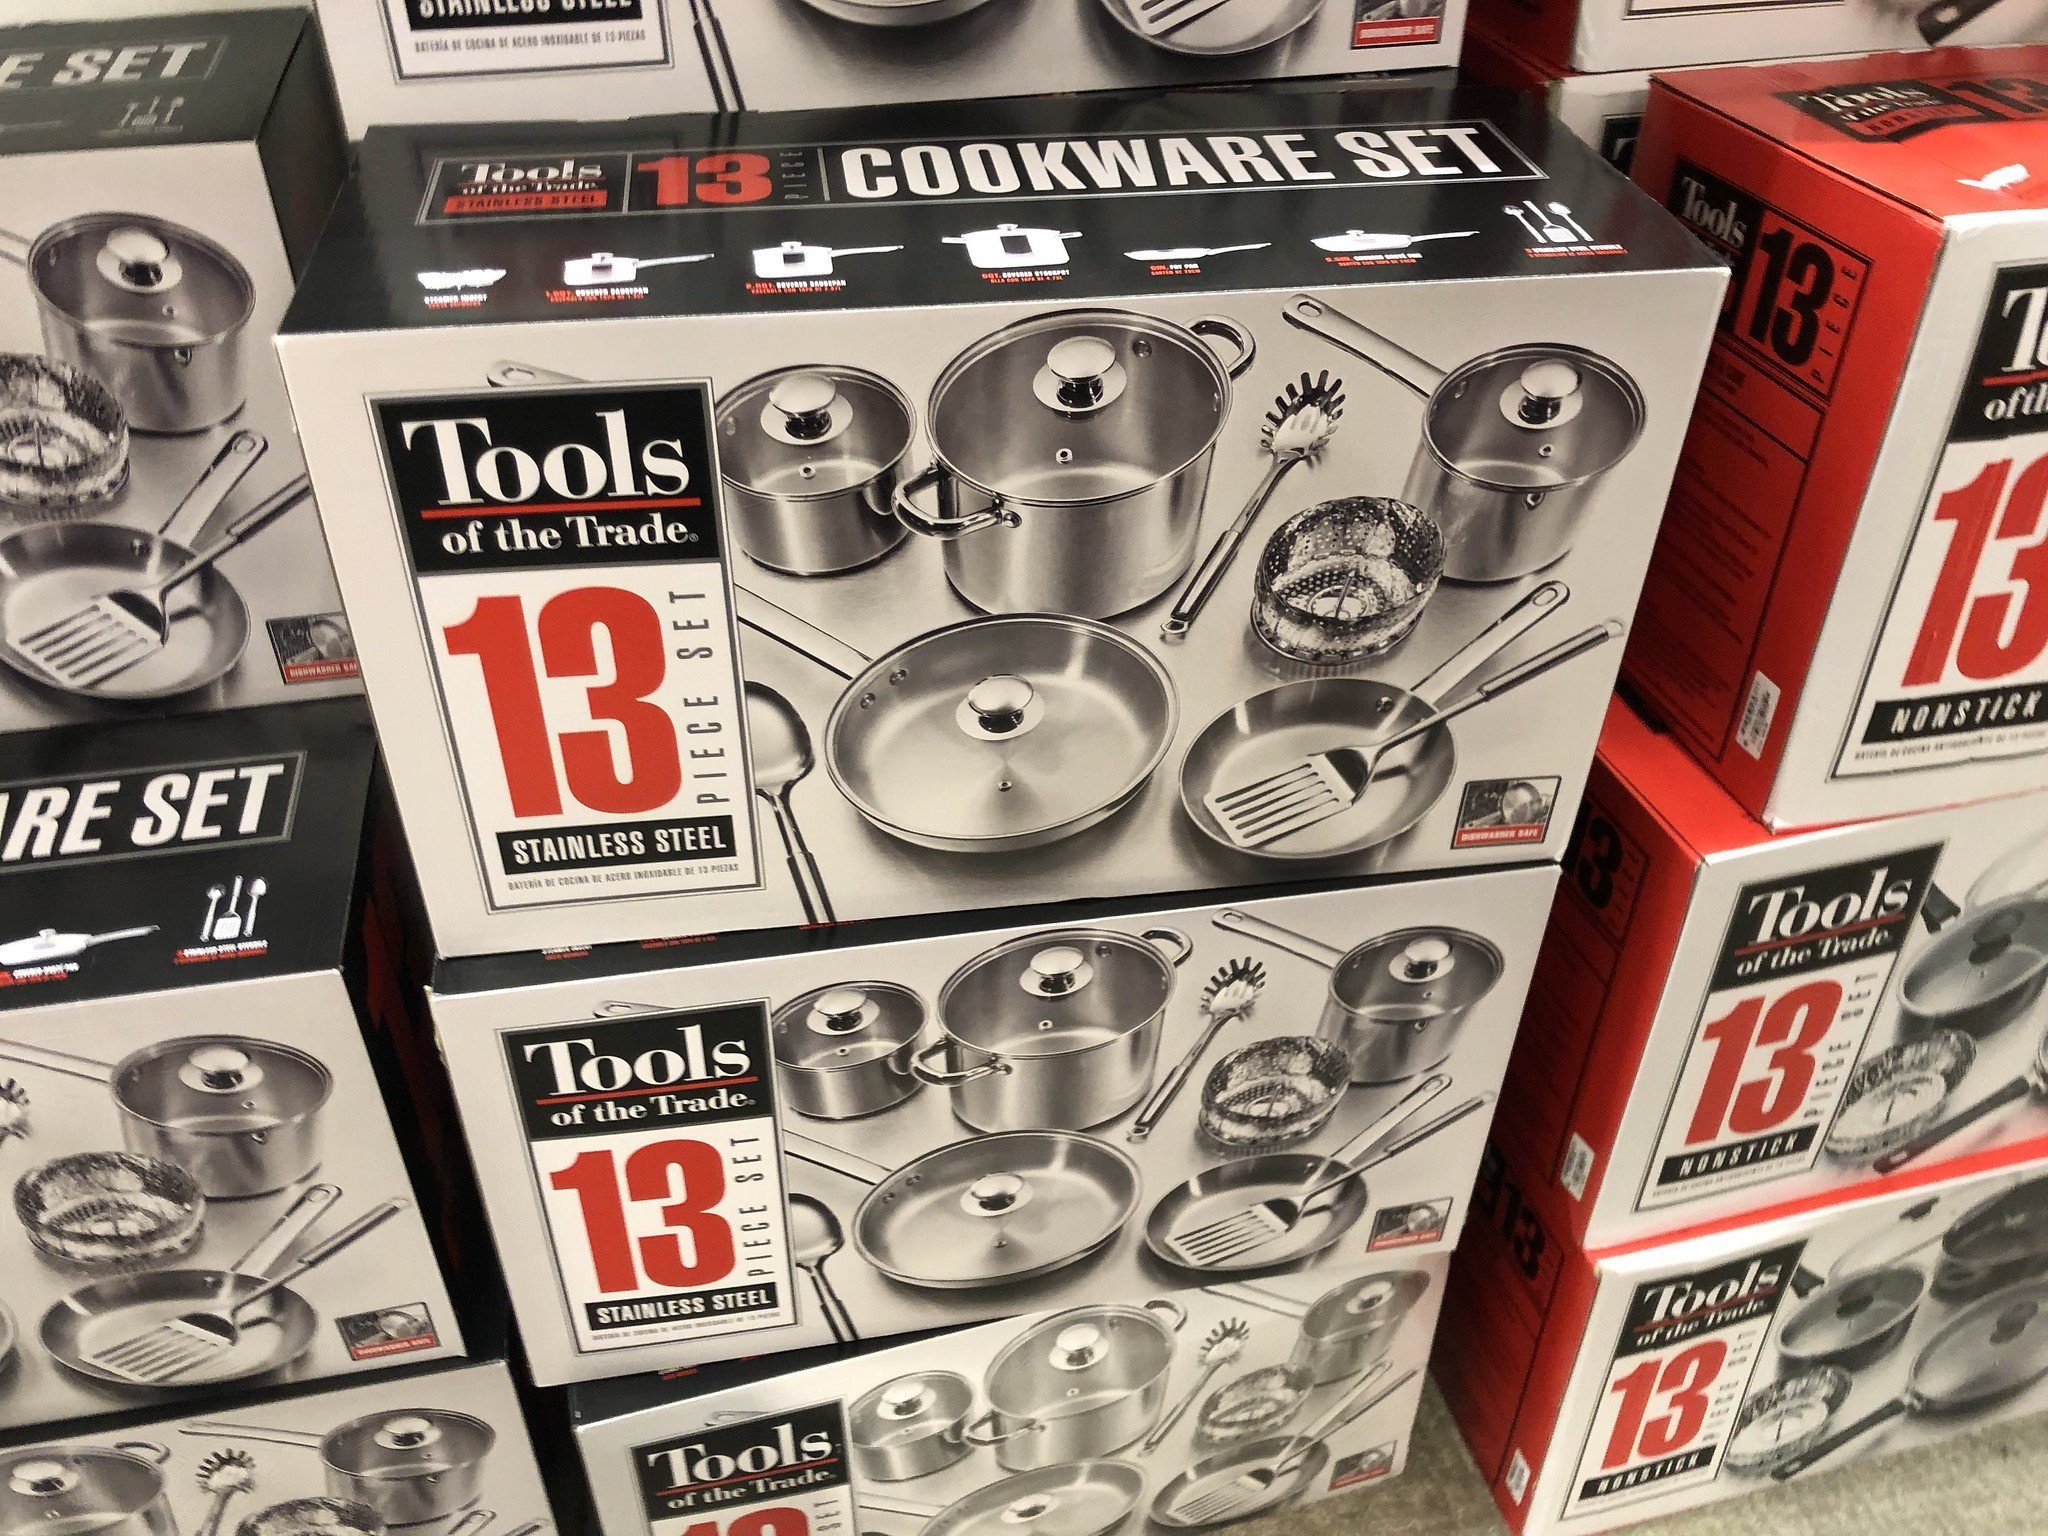 Tools of the Trade Cookware Sets on Sale